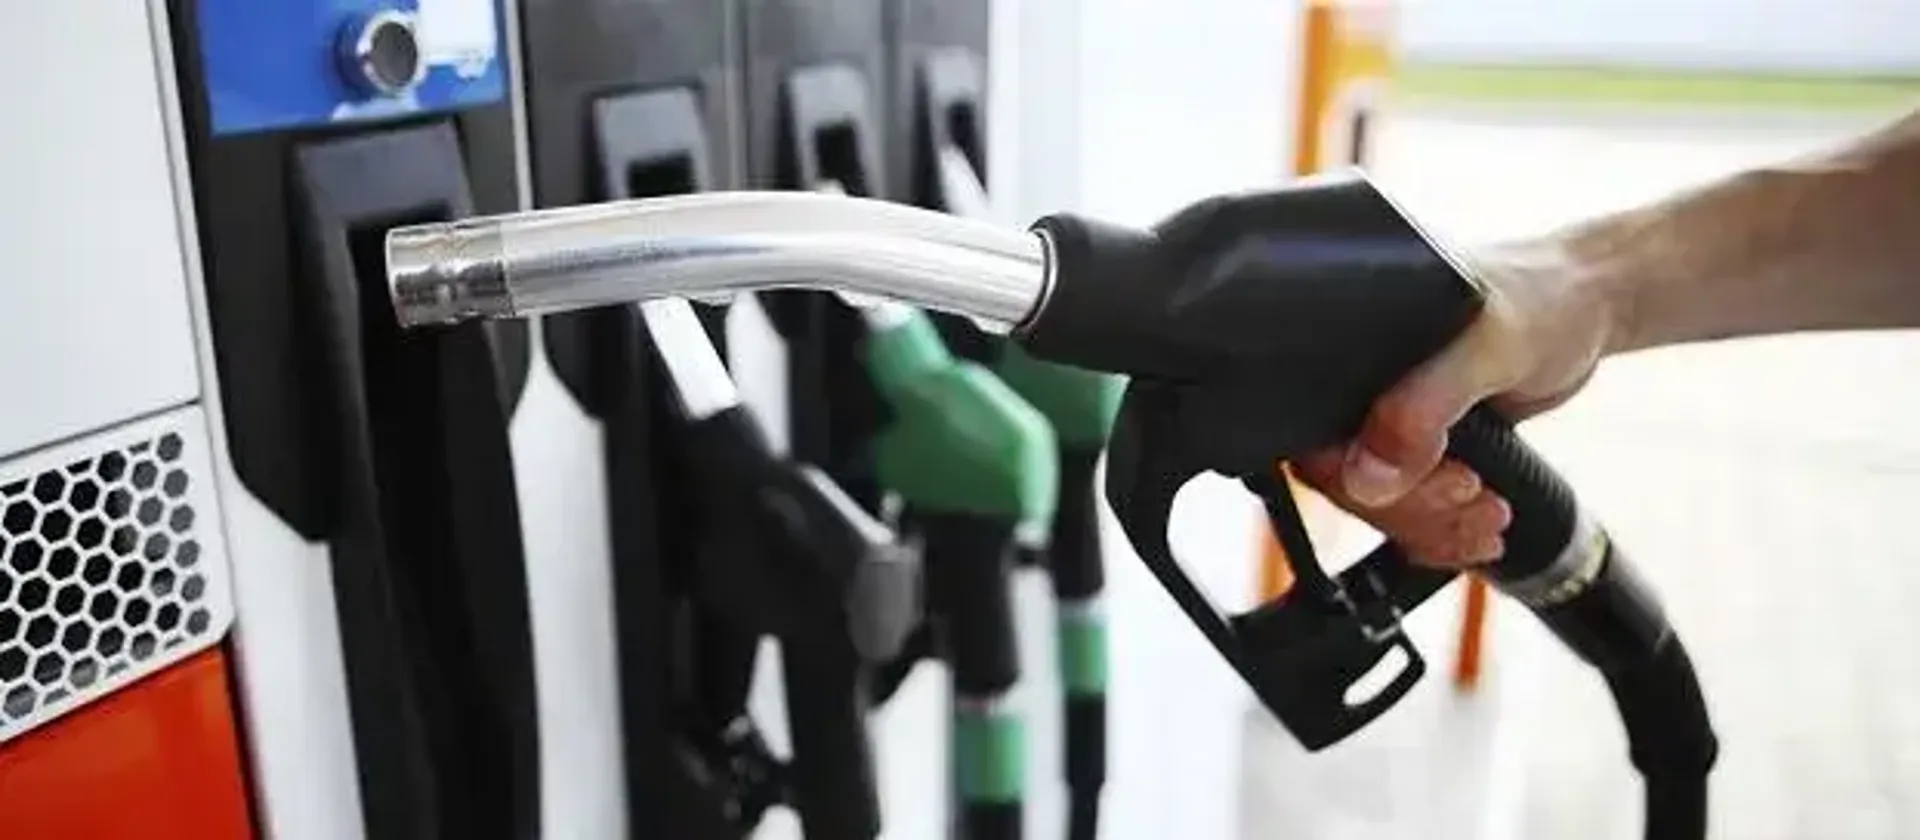 A person refuels their car at a gas station, holding the nozzle and inserting it into the fuel tank.